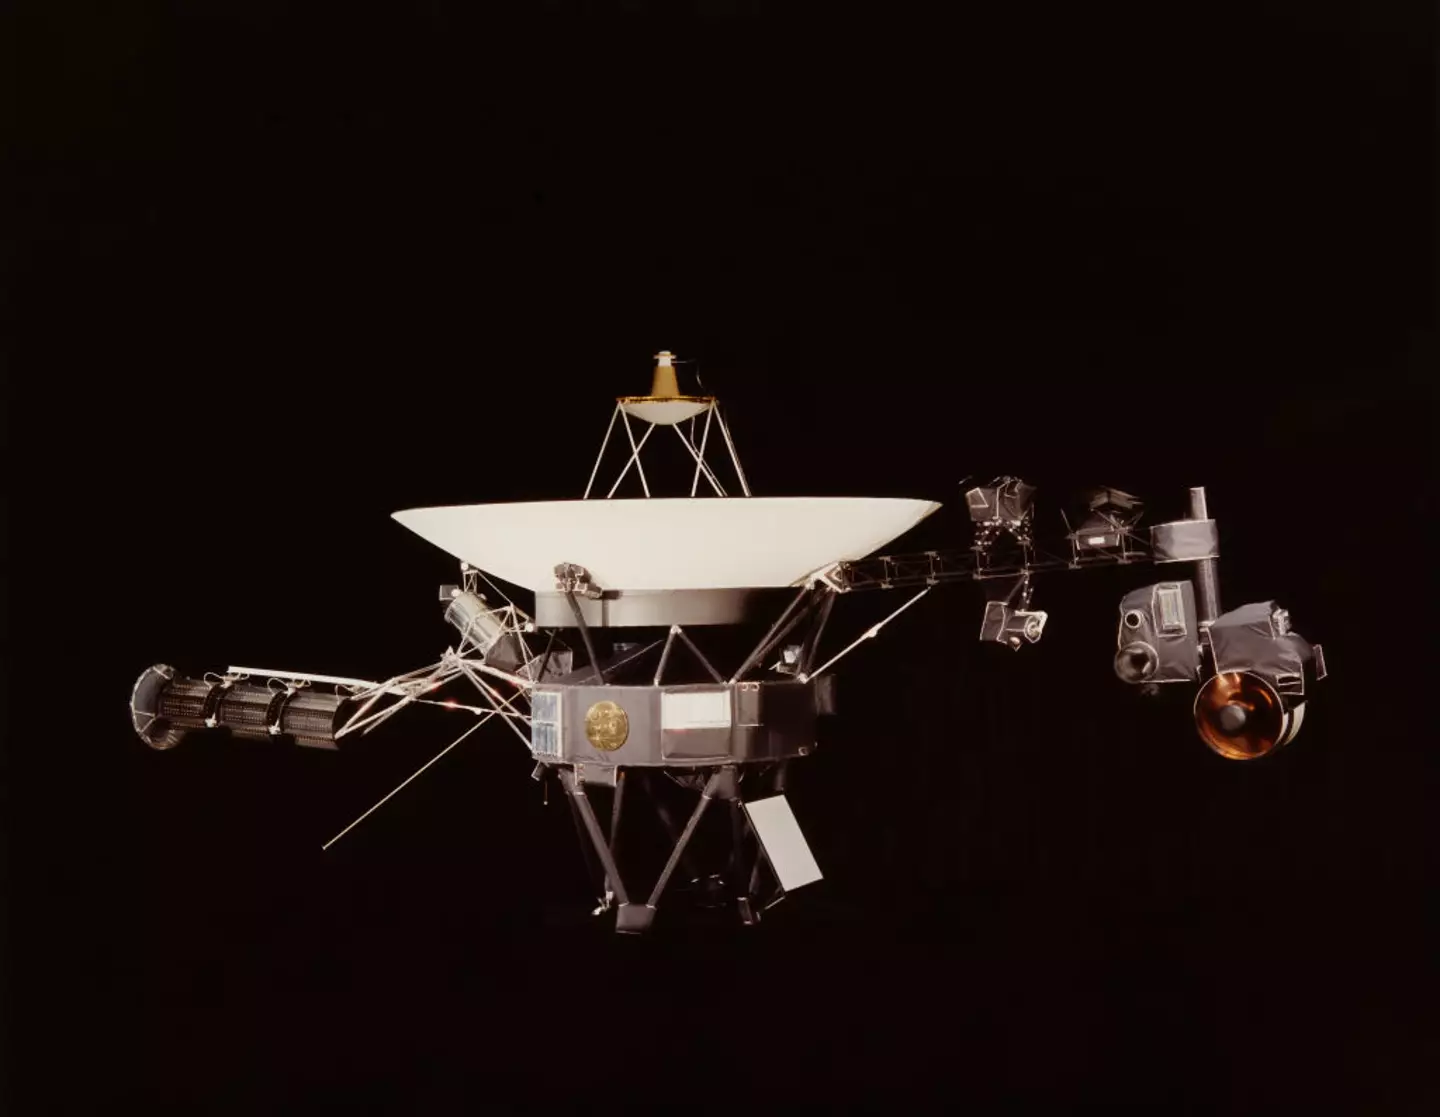 Voyager 1 has been out in space for almost 50 years. (NASA/Hulton Archive/Getty Images)